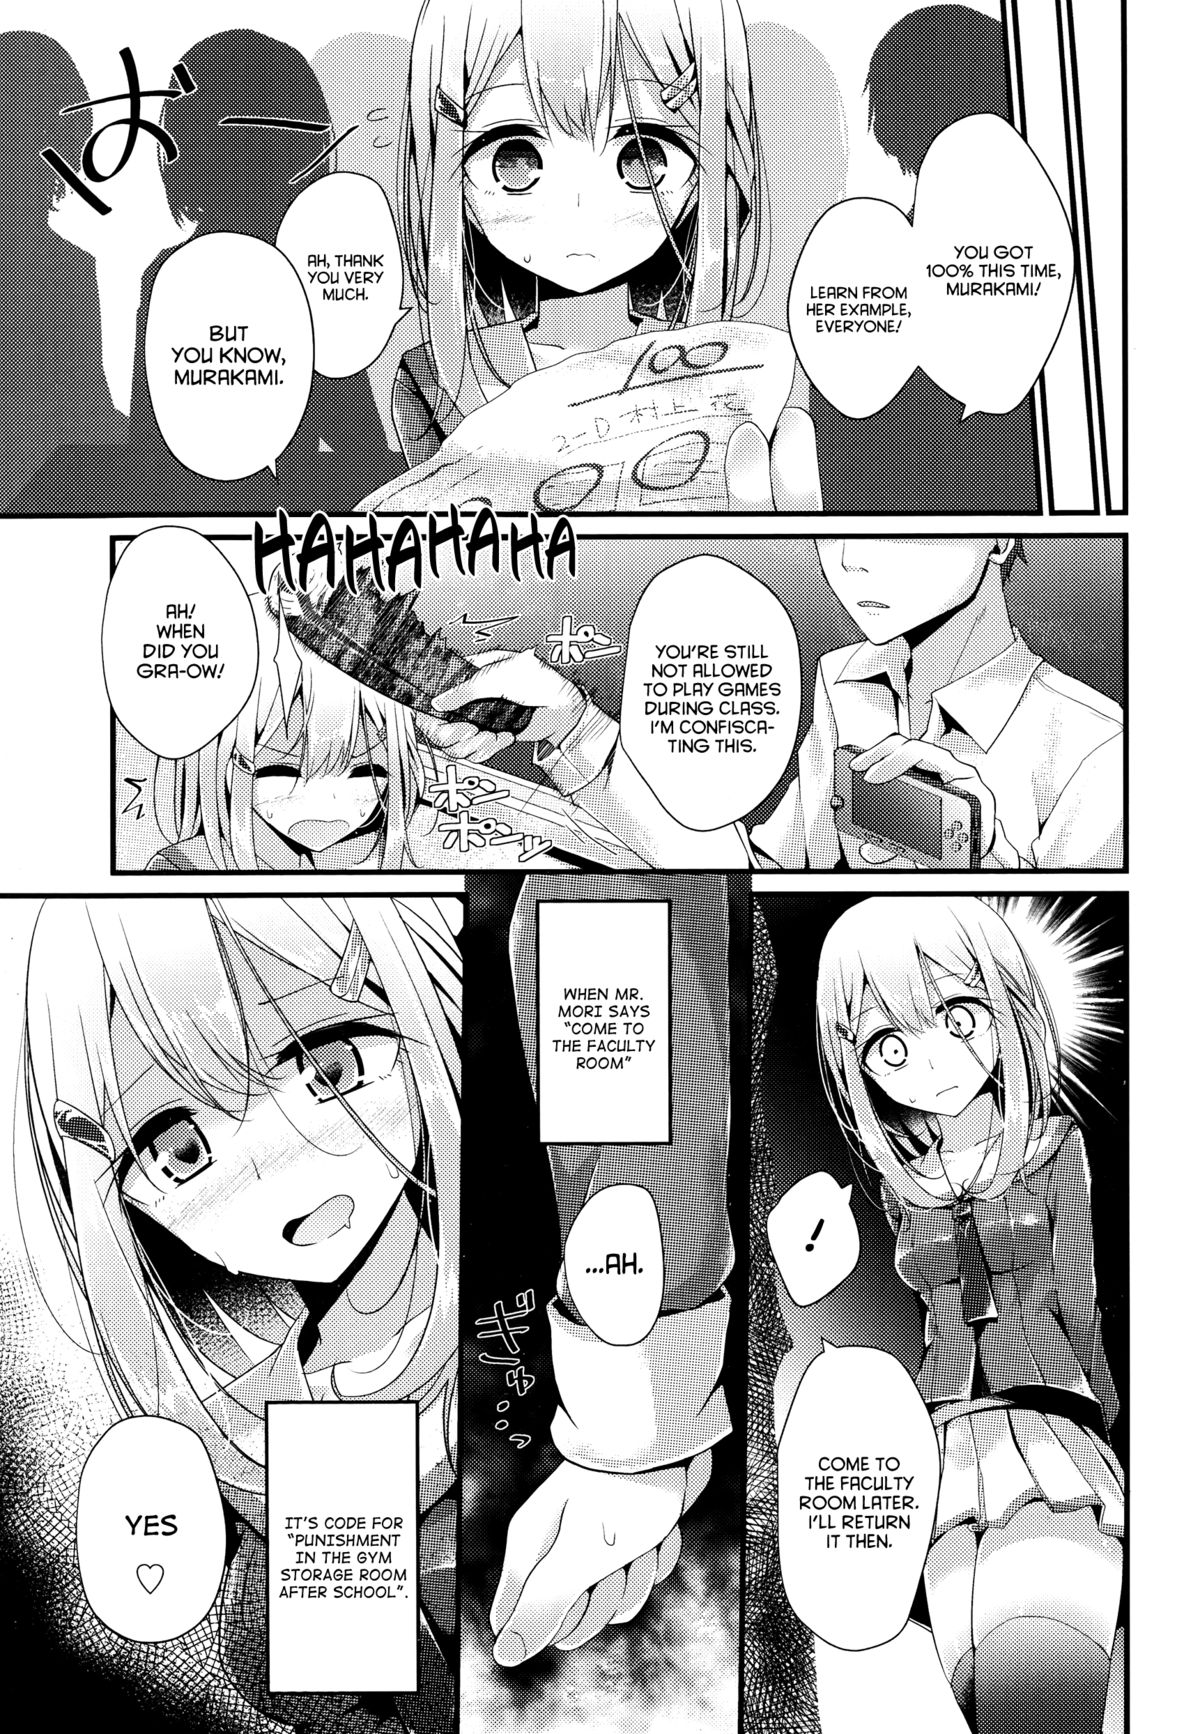 [Oouso] Olfactophilia (Girls forM Vol. 06) [English] =LWB= page 3 full